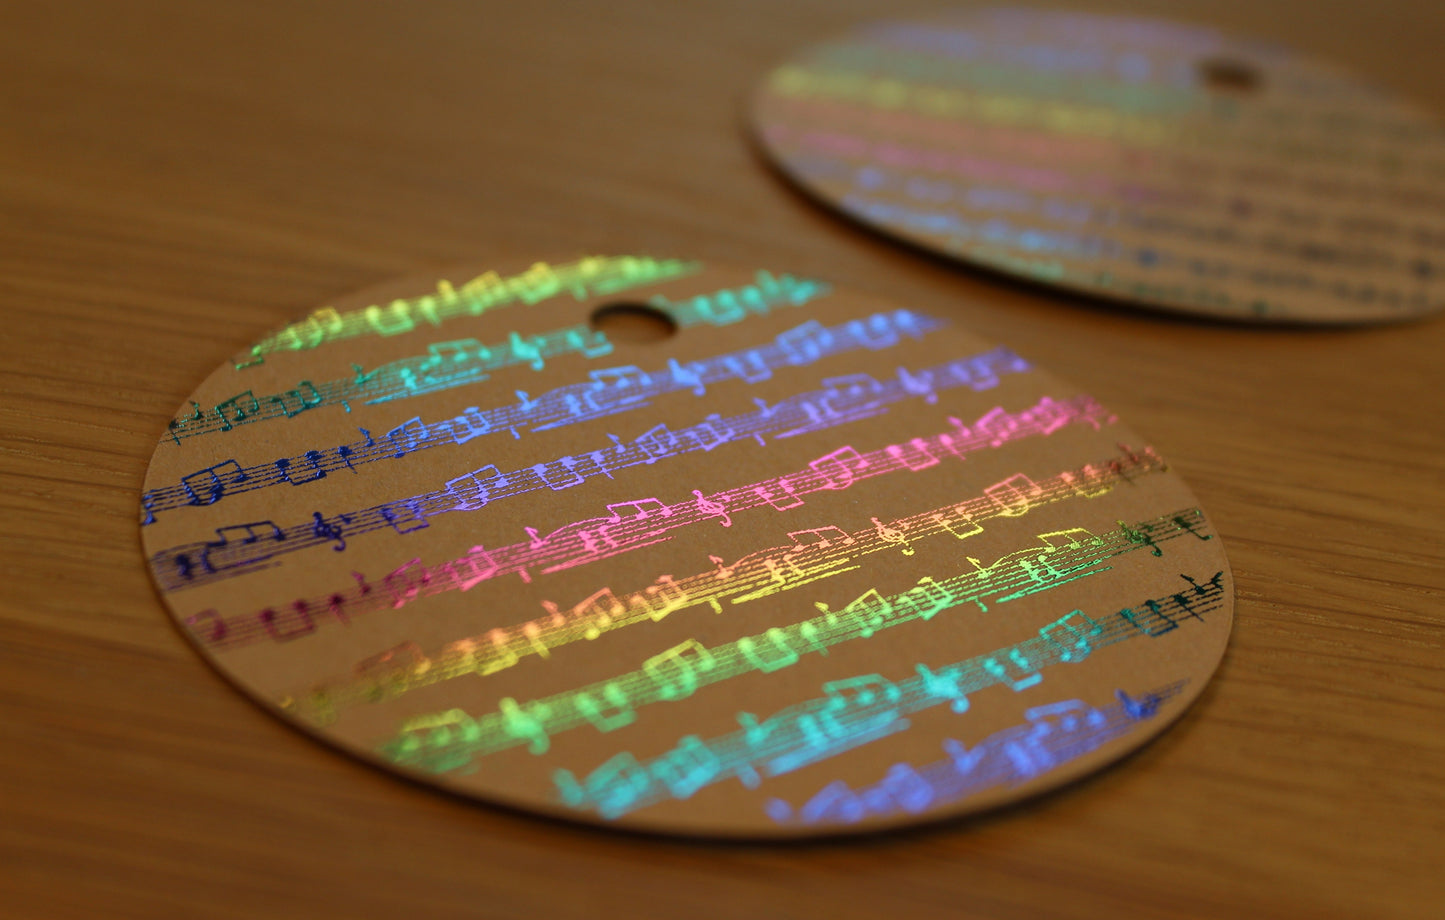 Round brown kraft gift tag. Design of rows of music in a multicoloured shiny foil.